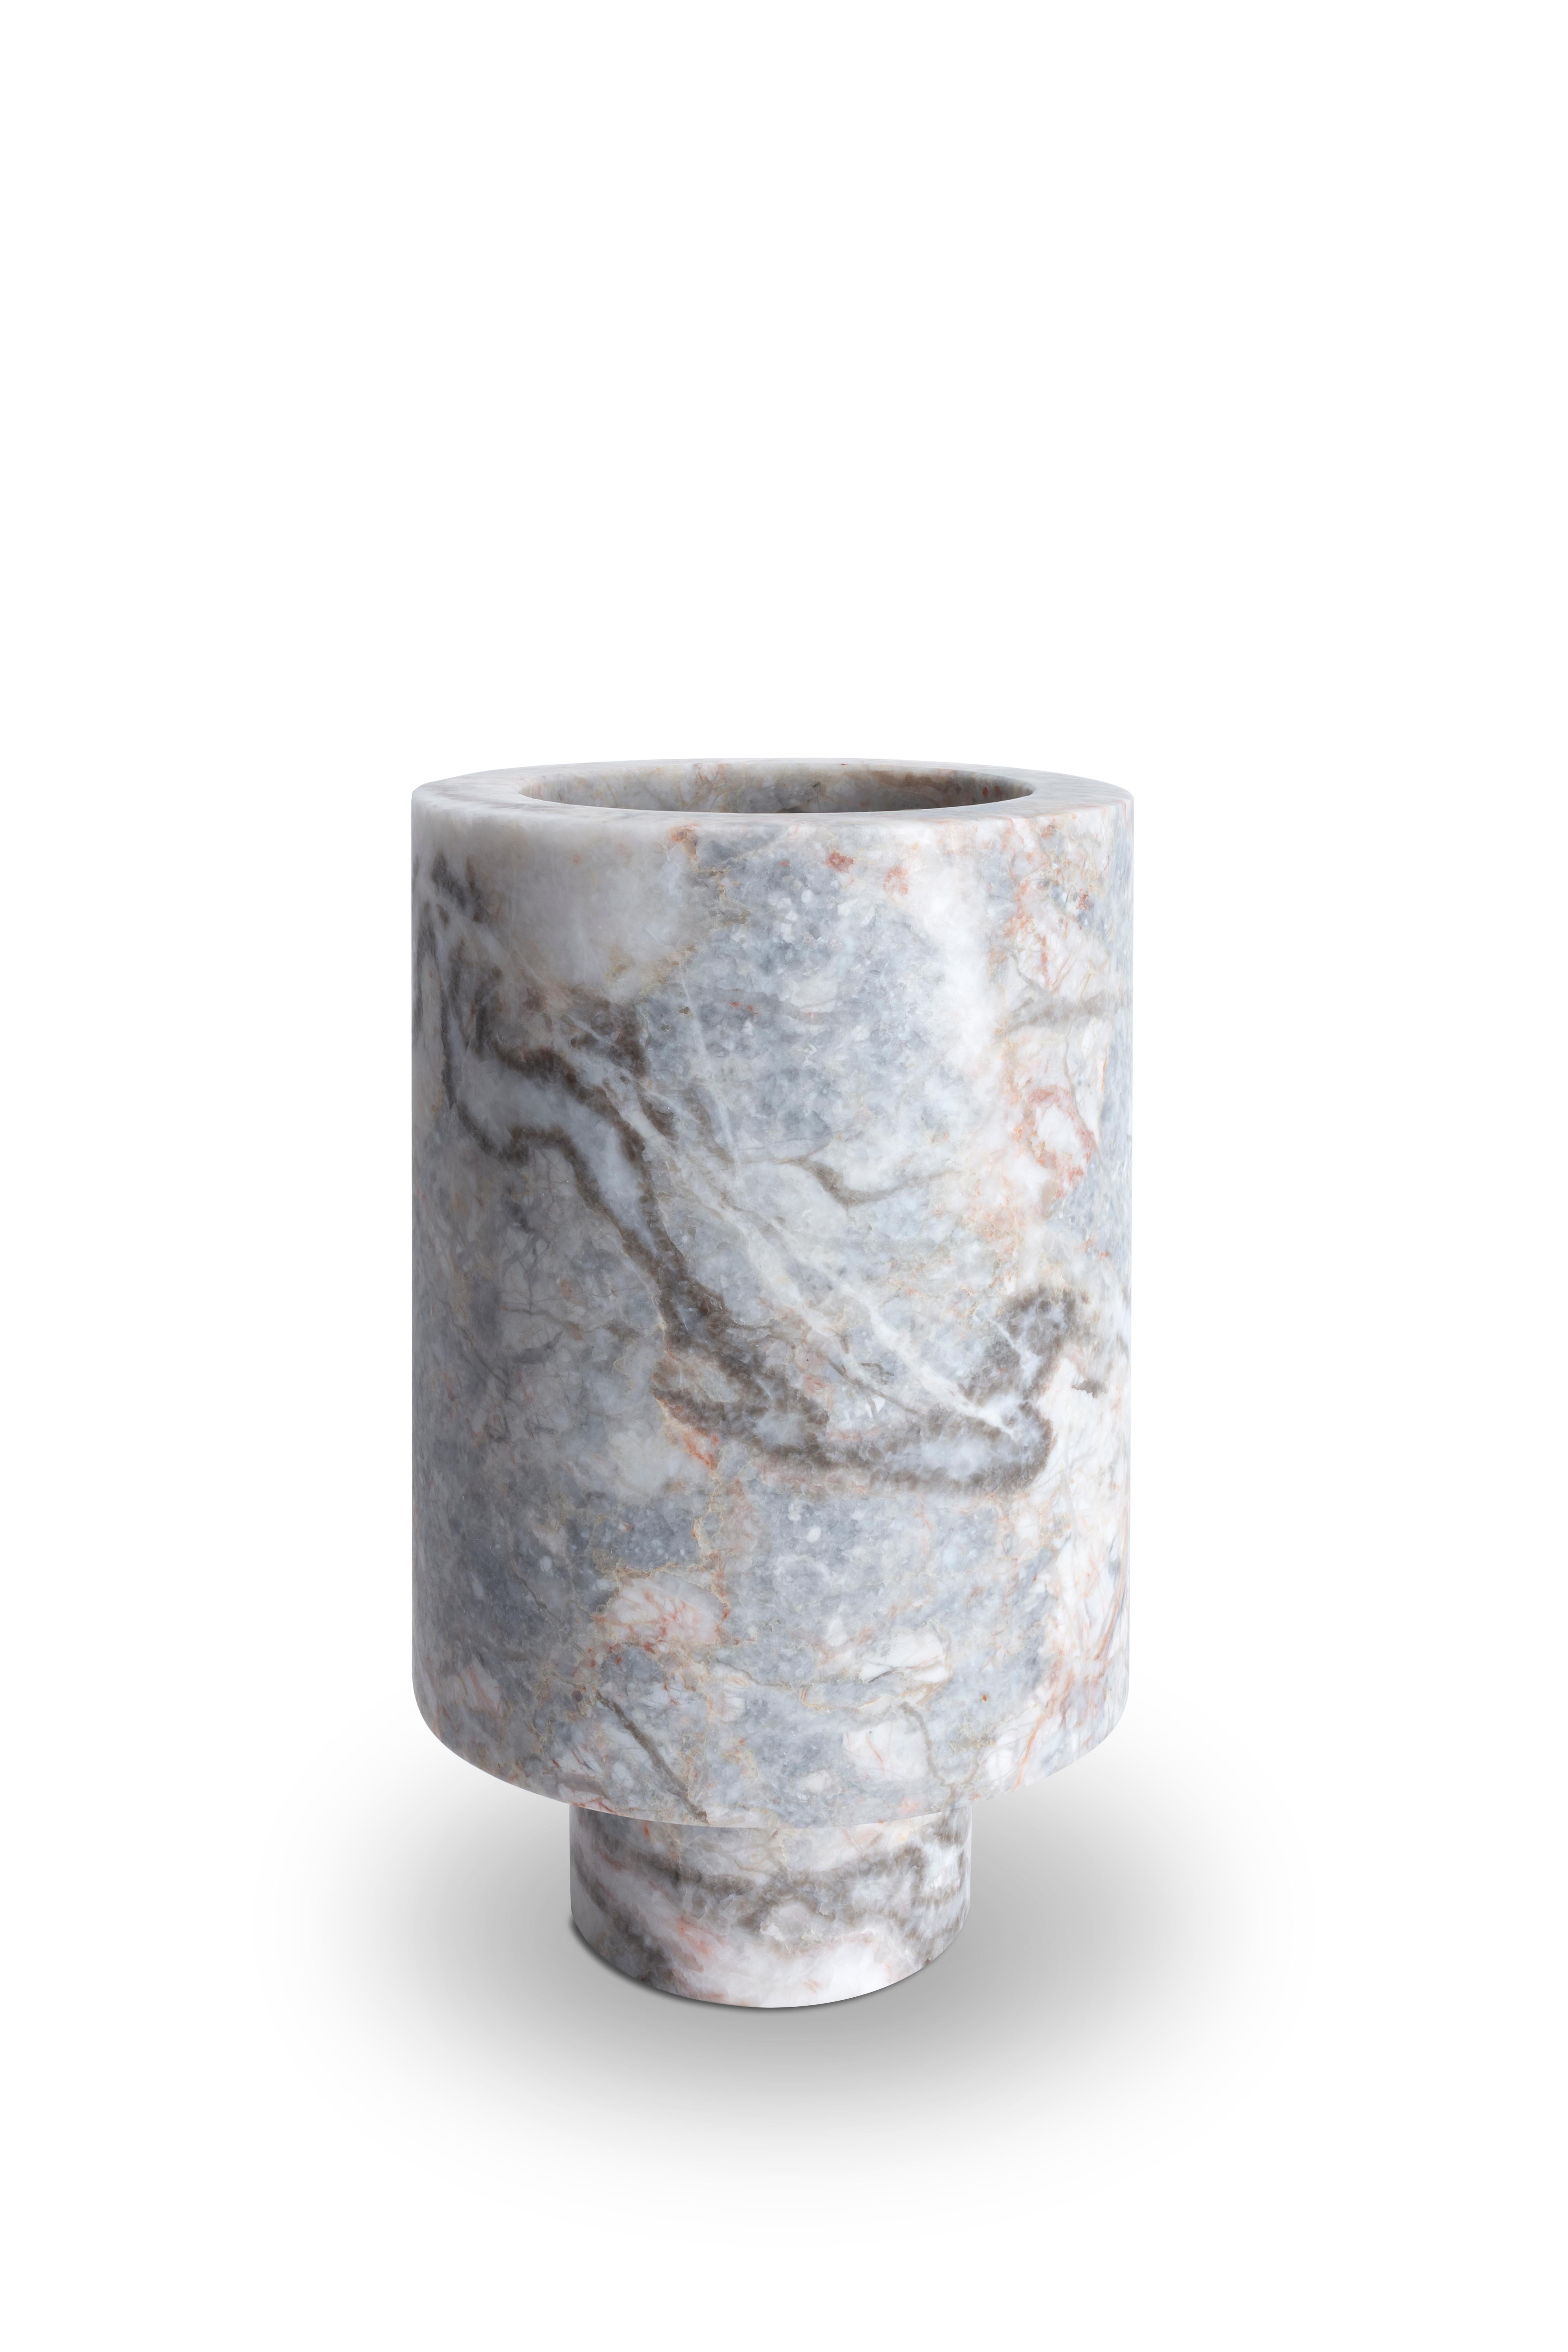 Fior Di Pesco Carnico Inside Out Vase by Karen Chekerdjian In New Condition For Sale In Geneve, CH